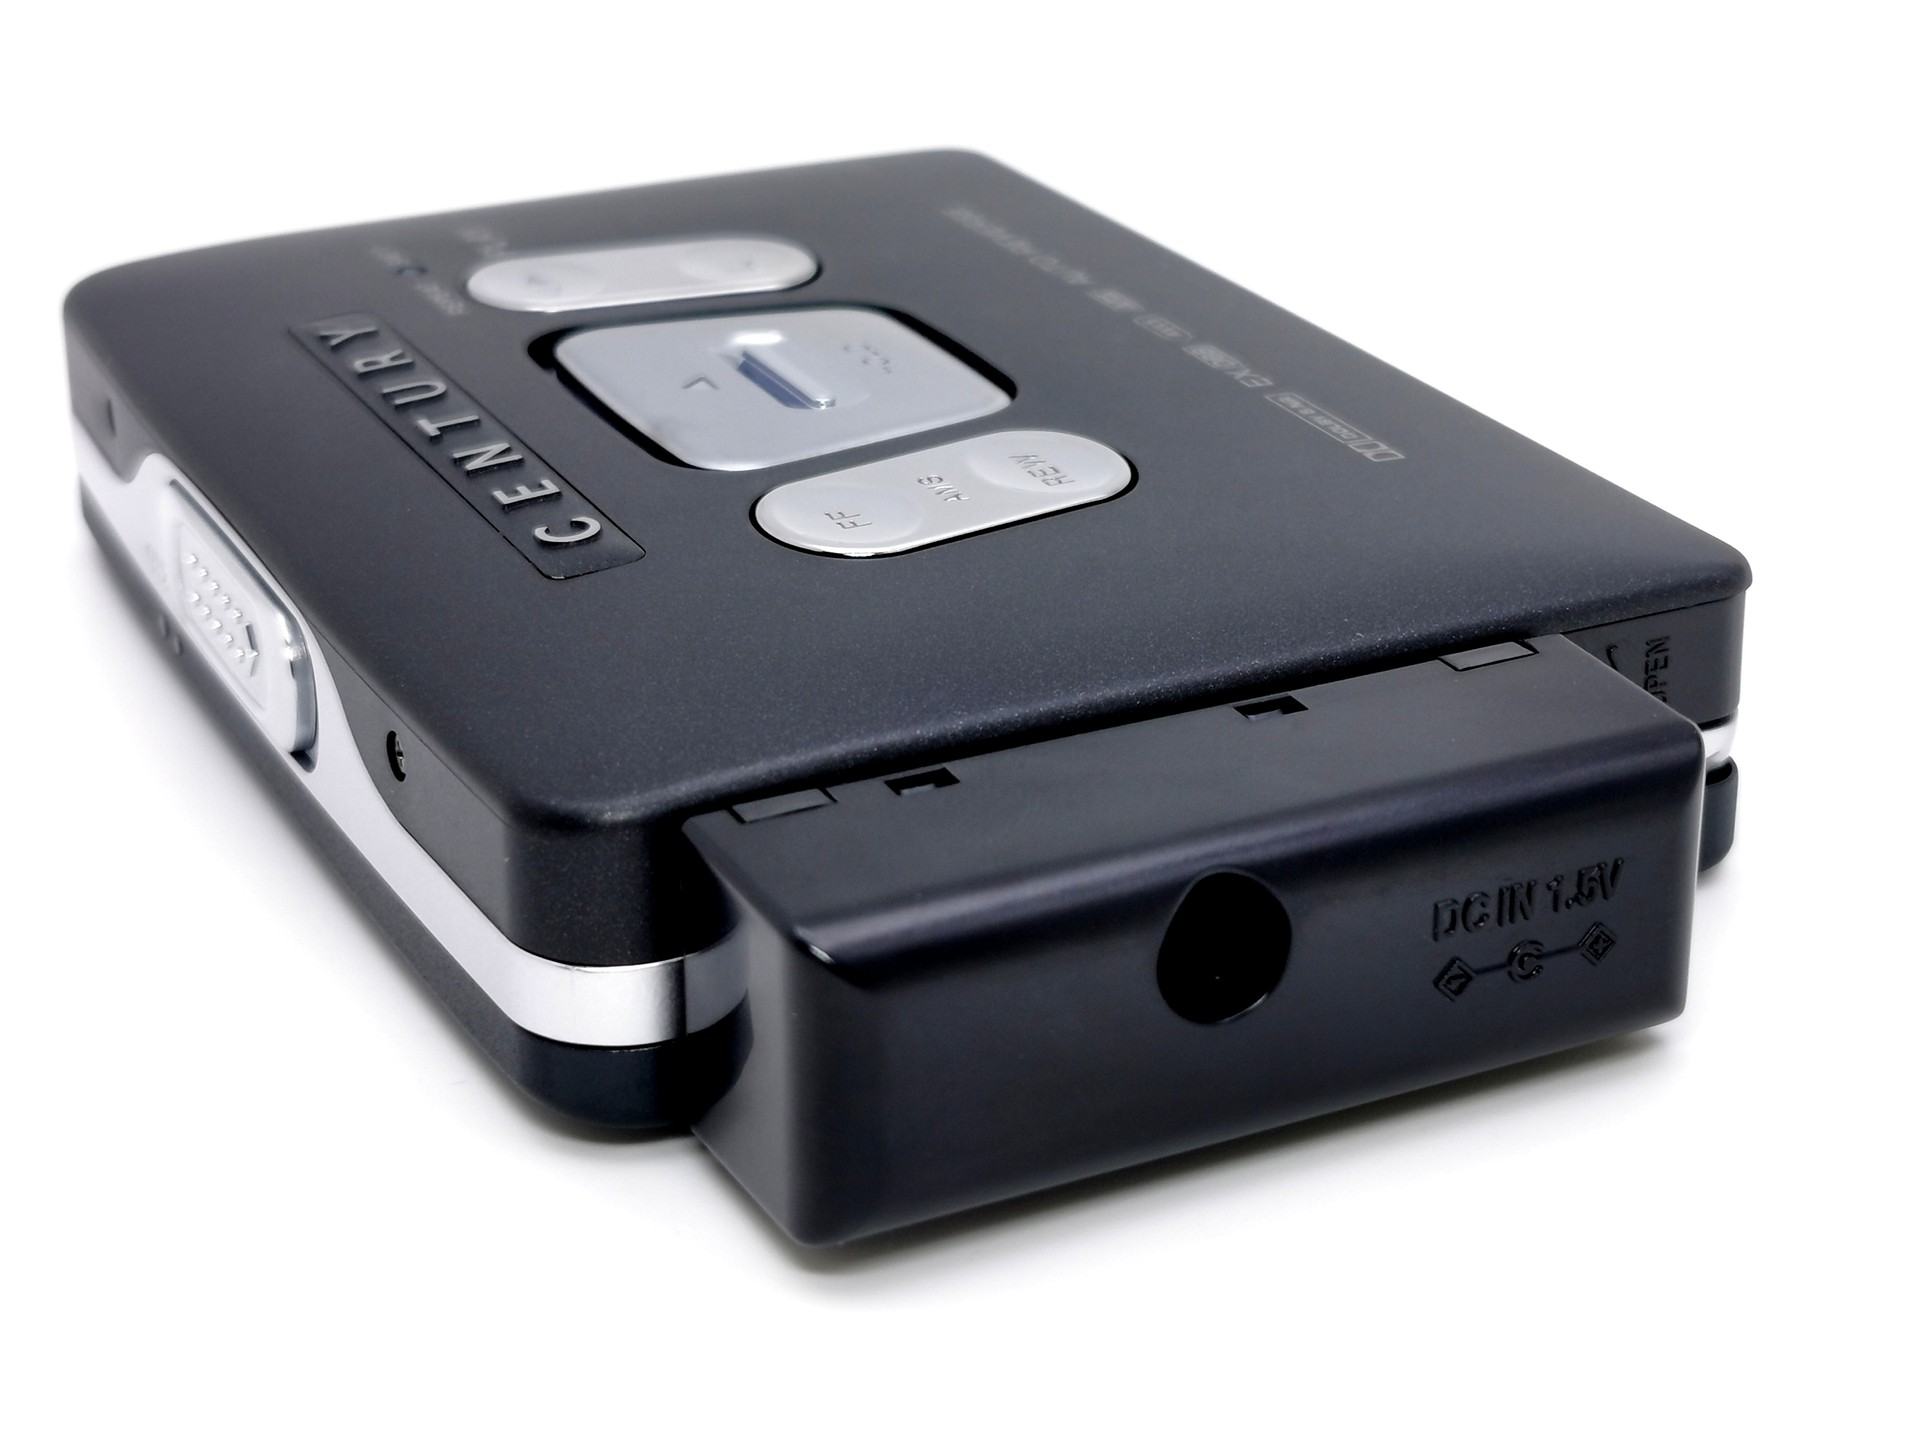 Sony_WM-EX622_-_Special_edition_adapter_only_sidecar_in_focus_ig-boxedwalkman